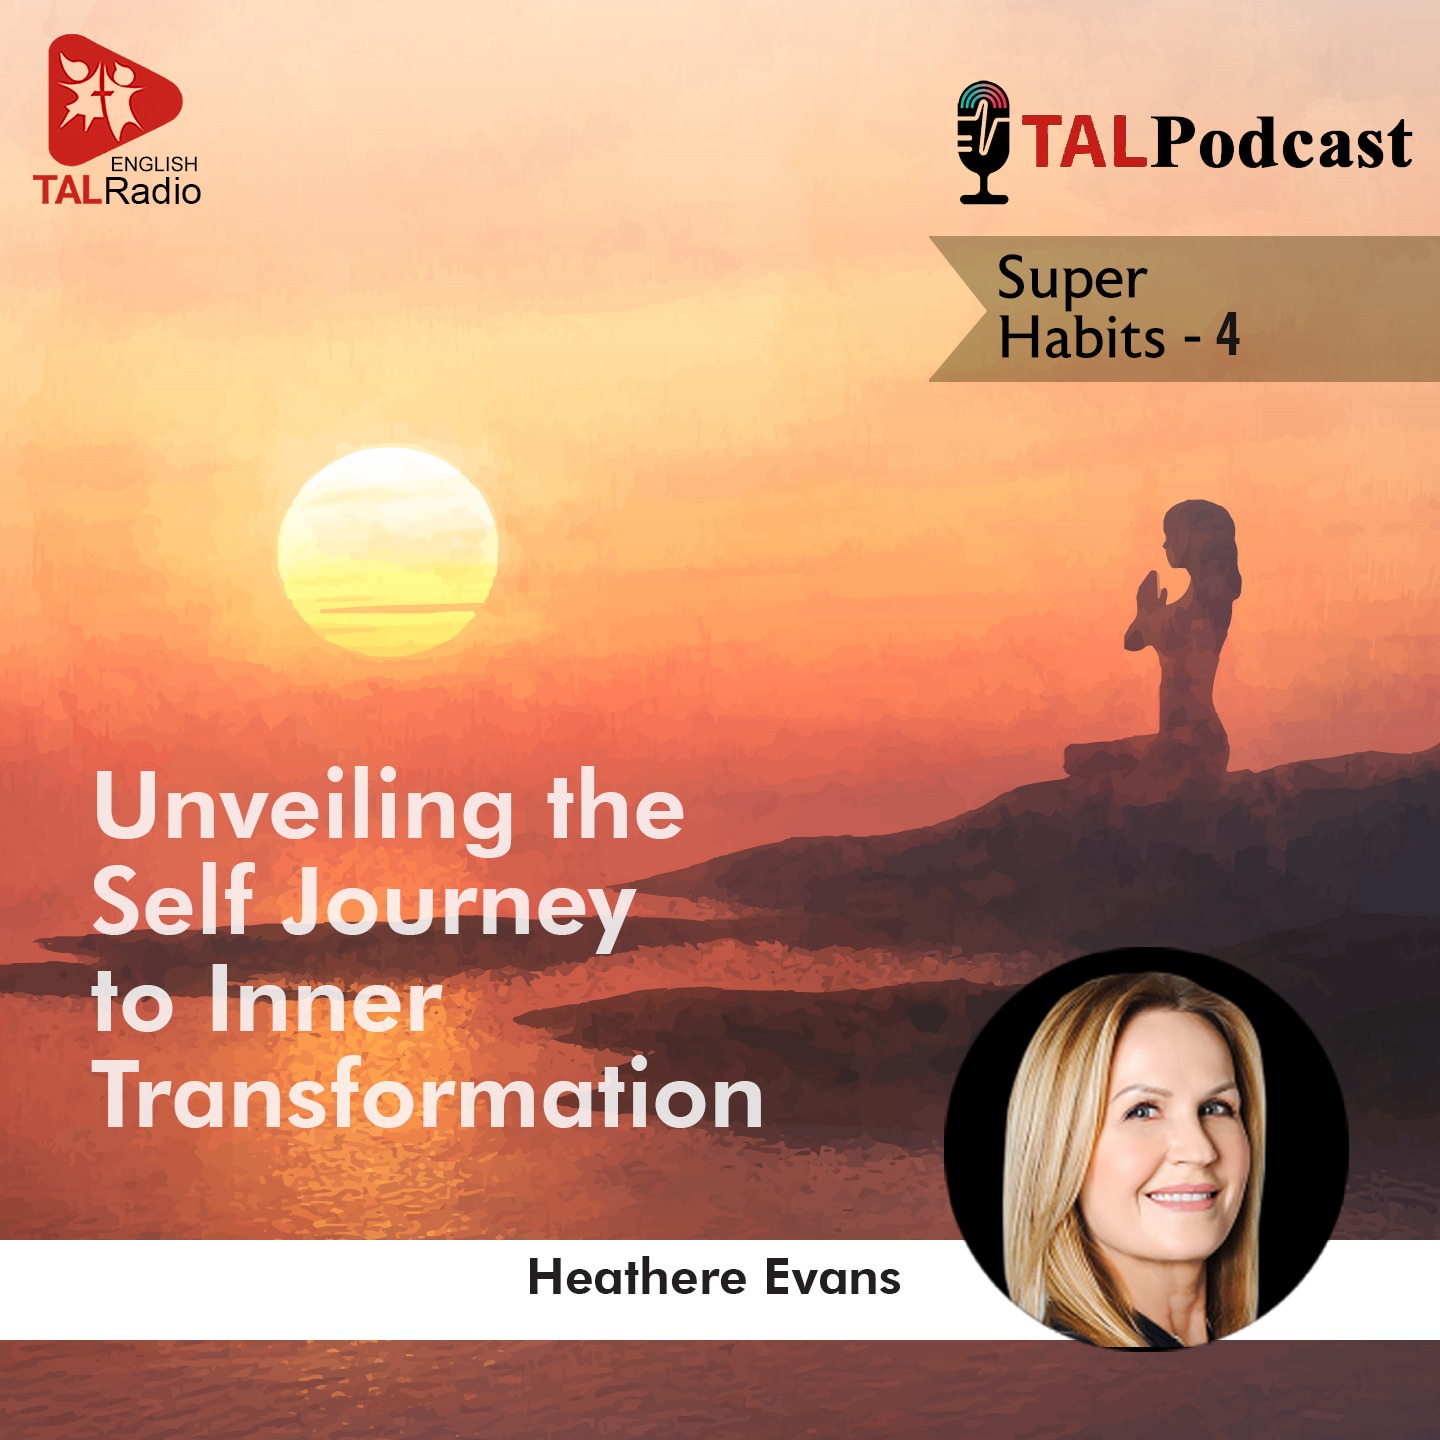 Unveiling the Self Journey to Inner Transformation | Super Habits - 4